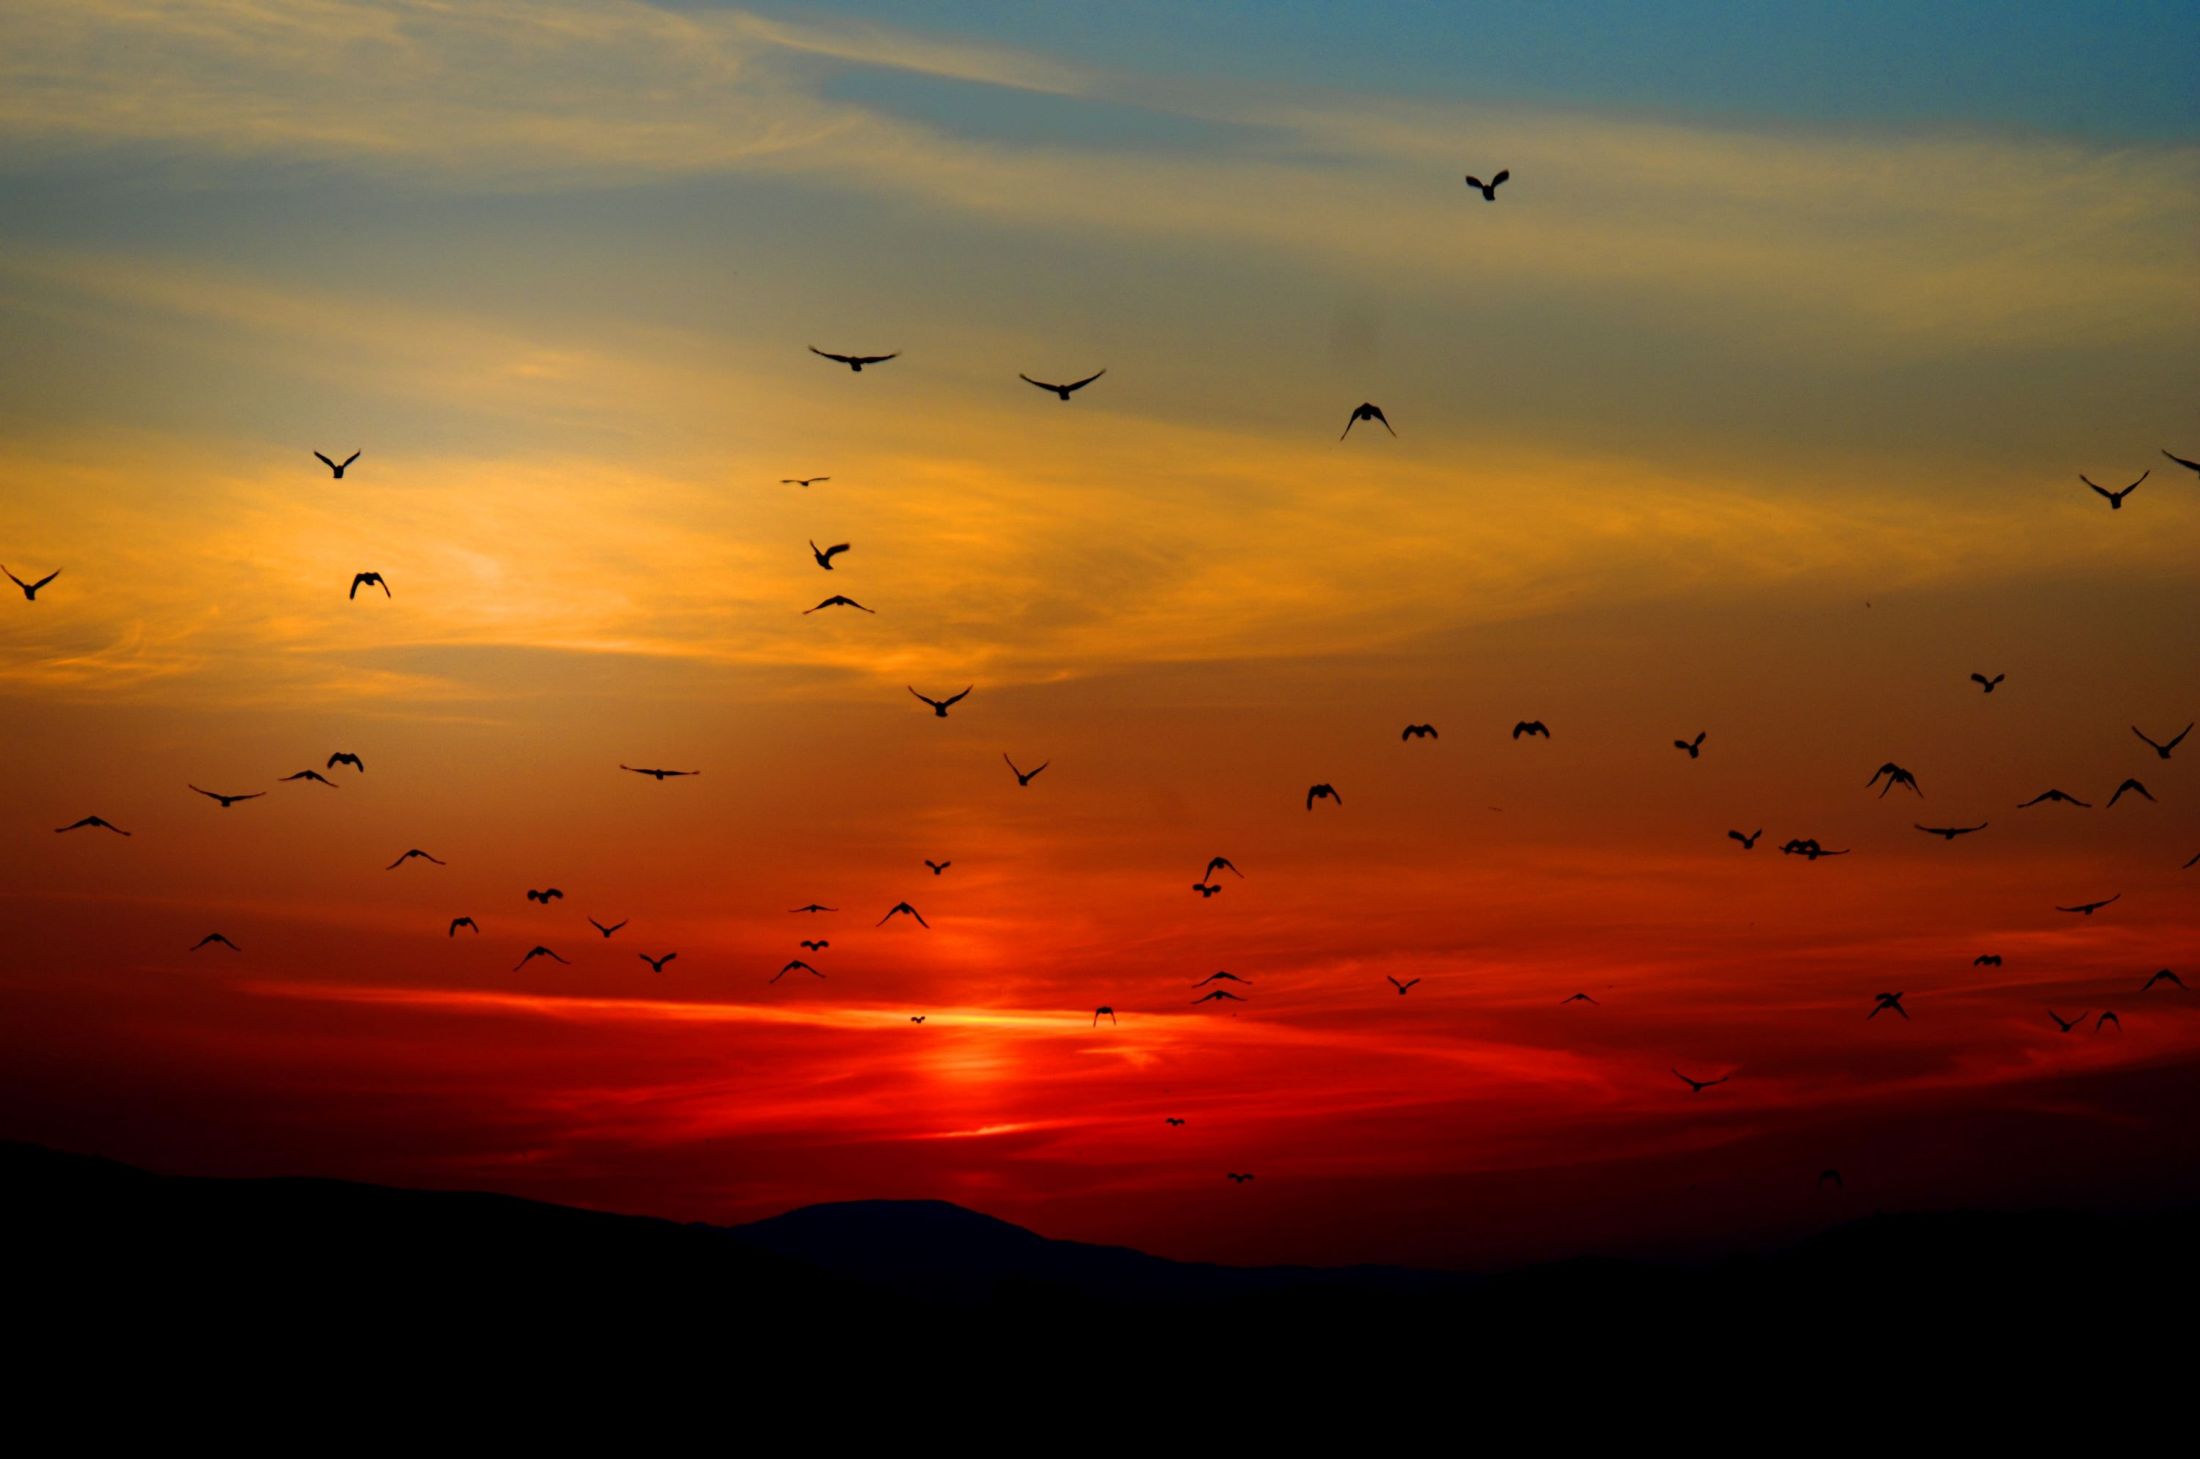 Birds silhouetted against a cloudy sunset sky.